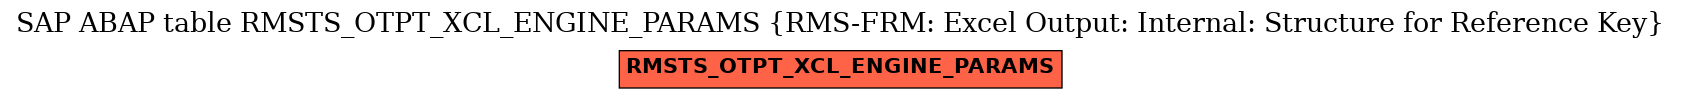 E-R Diagram for table RMSTS_OTPT_XCL_ENGINE_PARAMS (RMS-FRM: Excel Output: Internal: Structure for Reference Key)